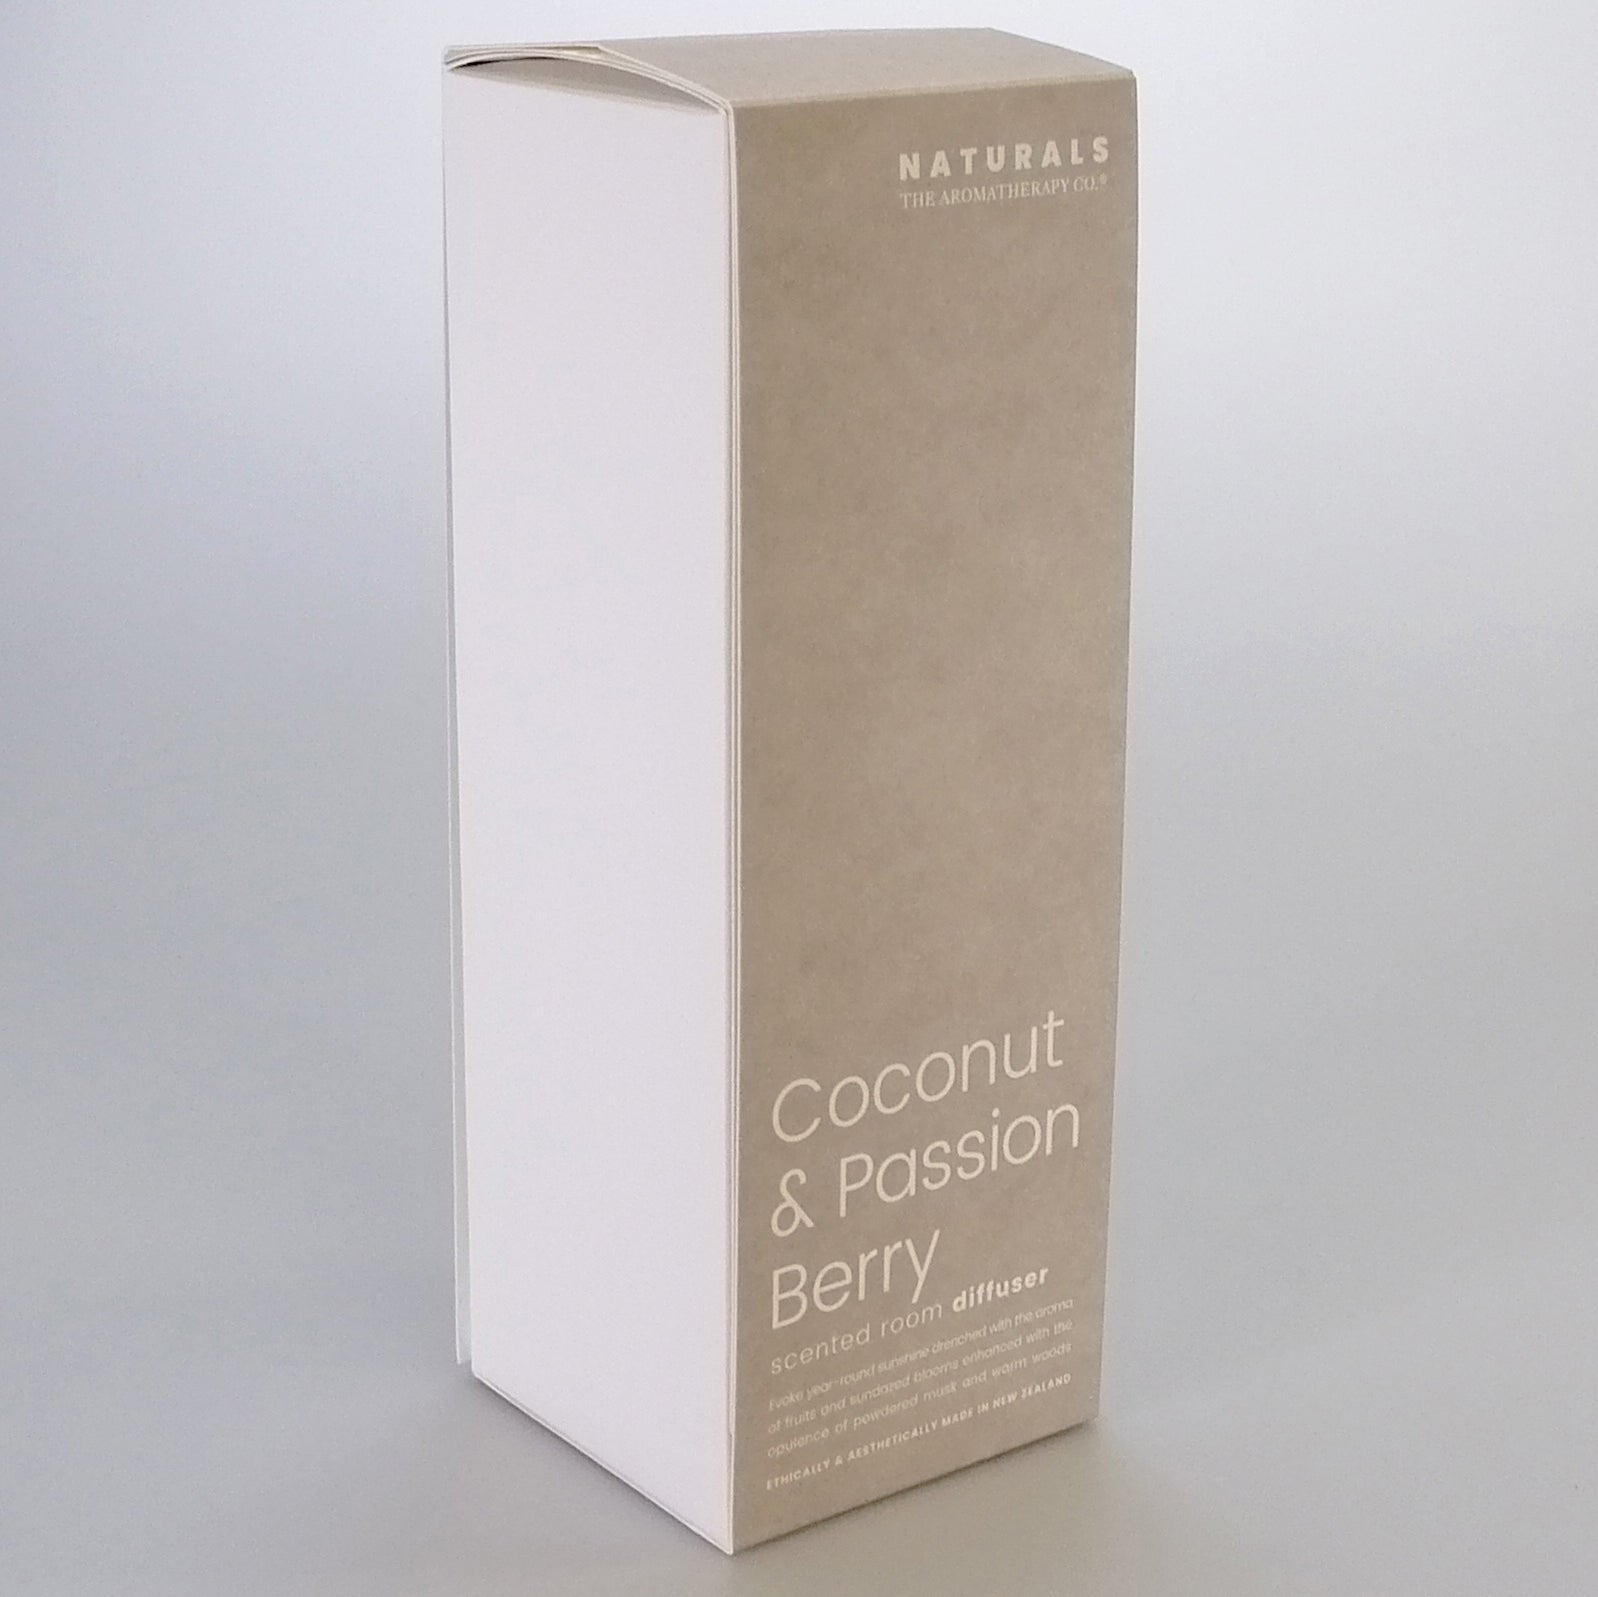 The Aromatherapy Co. Naturals - Coconut & Passion Berry Diffuser